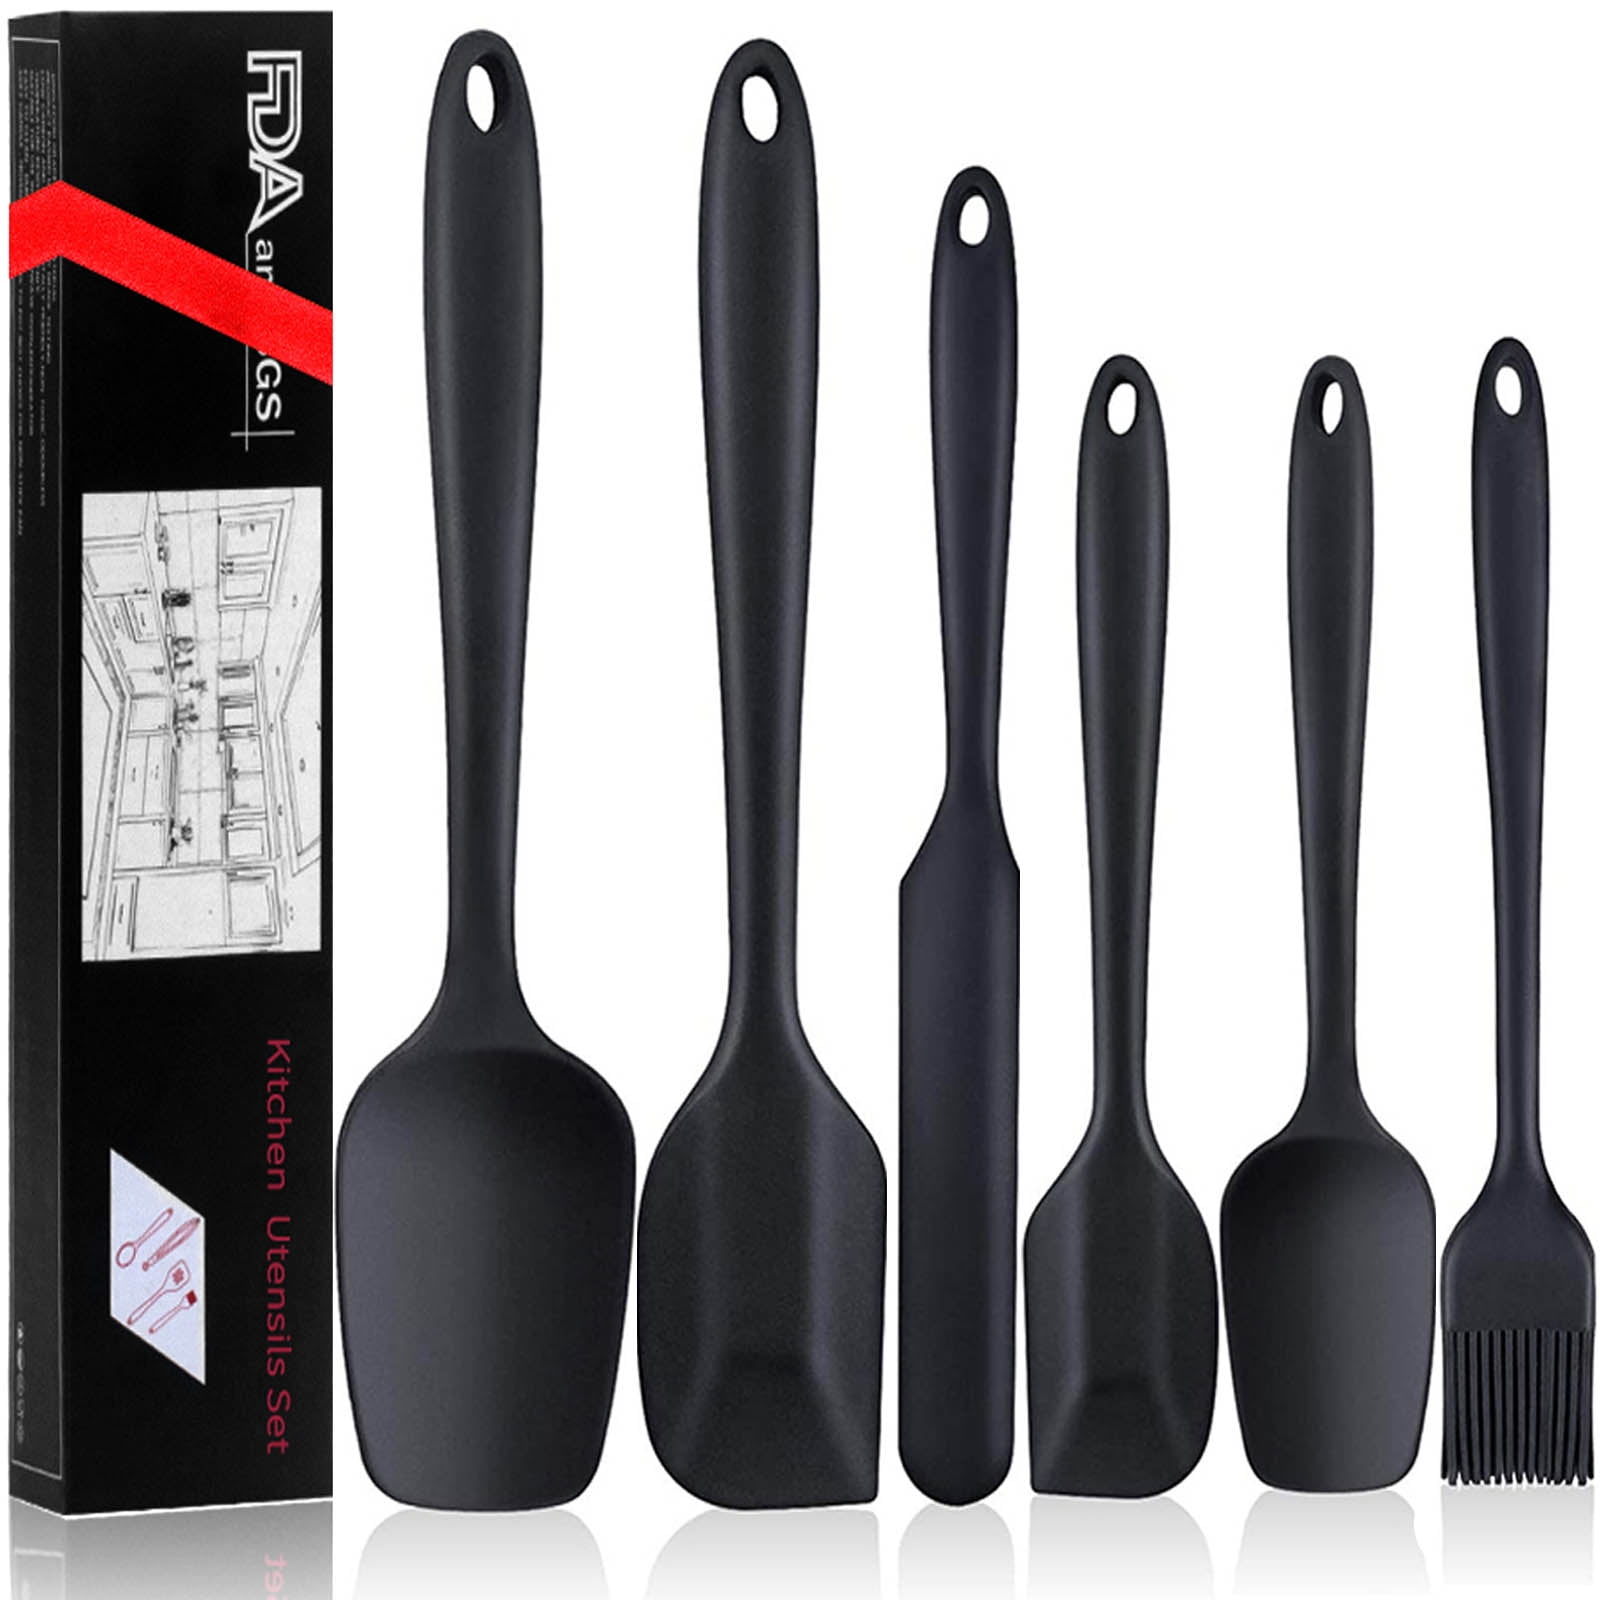 Restaurantware 10.6 inch x 2.2 inch Silicone Spatula, 1 Flat Flexible Spatula - Dishwasher-Safe, withstands Heat Up to 570F, Black Silicone Mixing